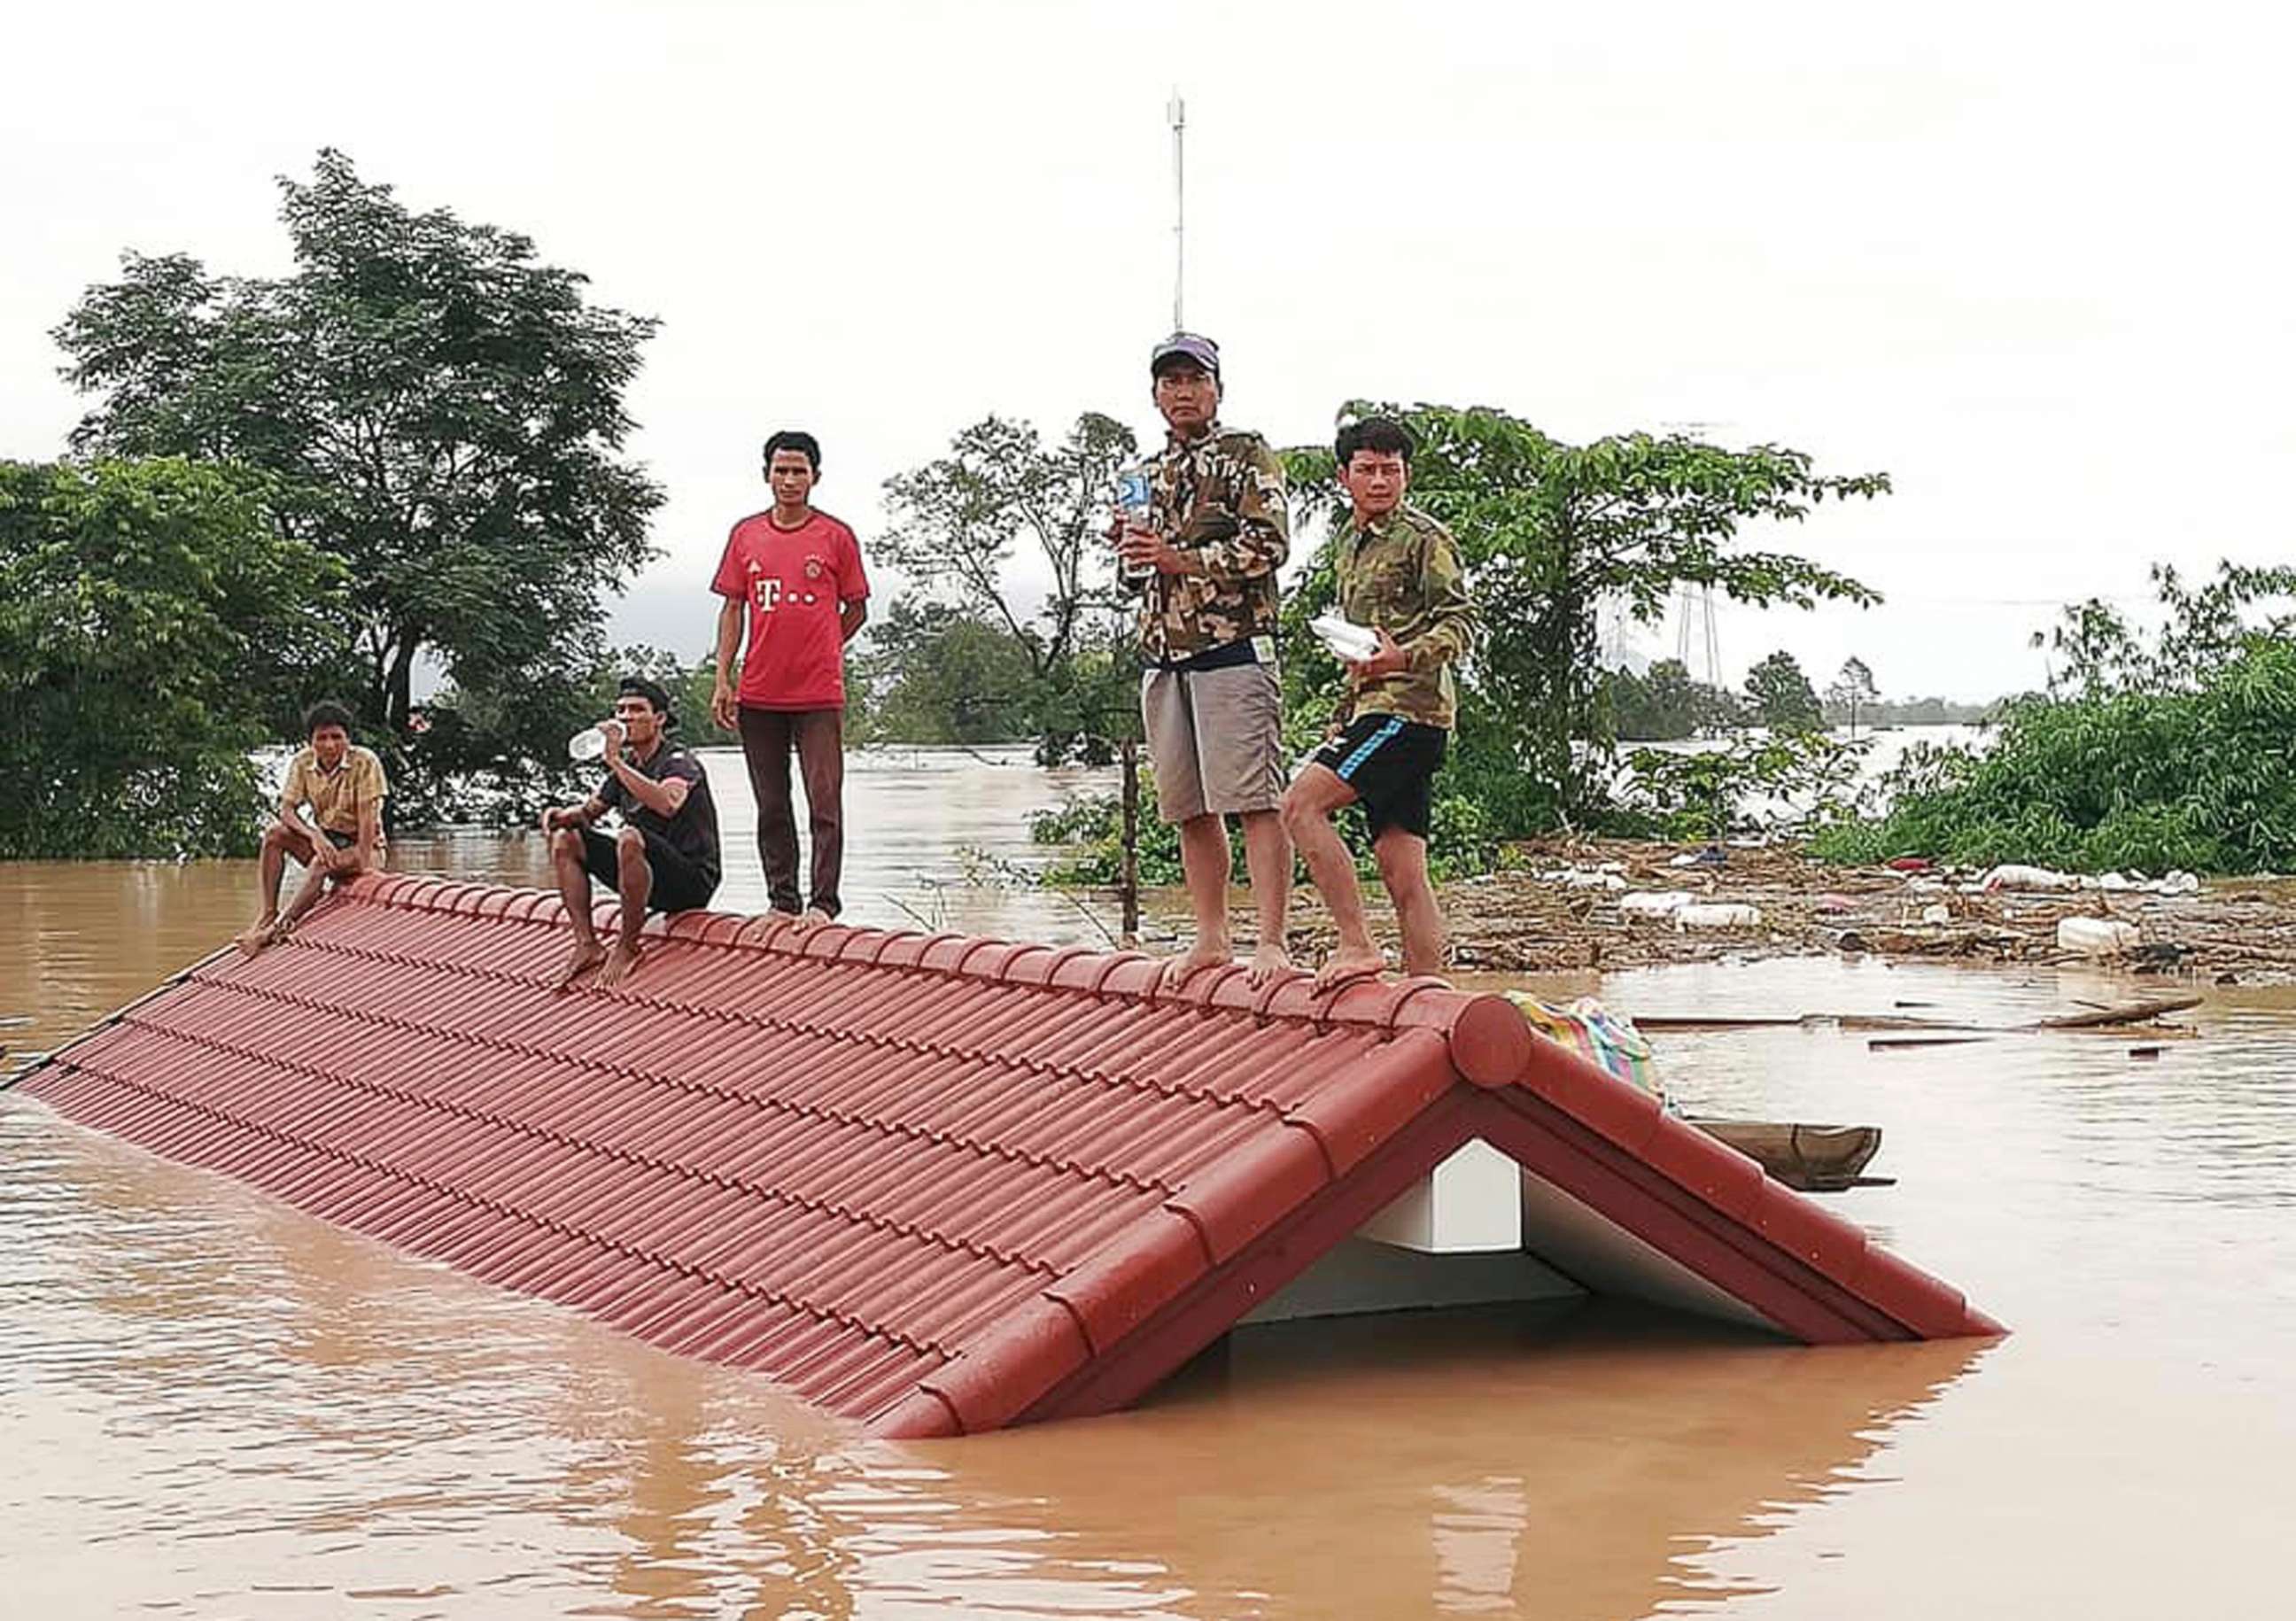 PHOTO: Villagers take refuge on a rooftop above flood waters from a collapsed dam in the Attapeu district of southeastern Laos, July 24, 2018.